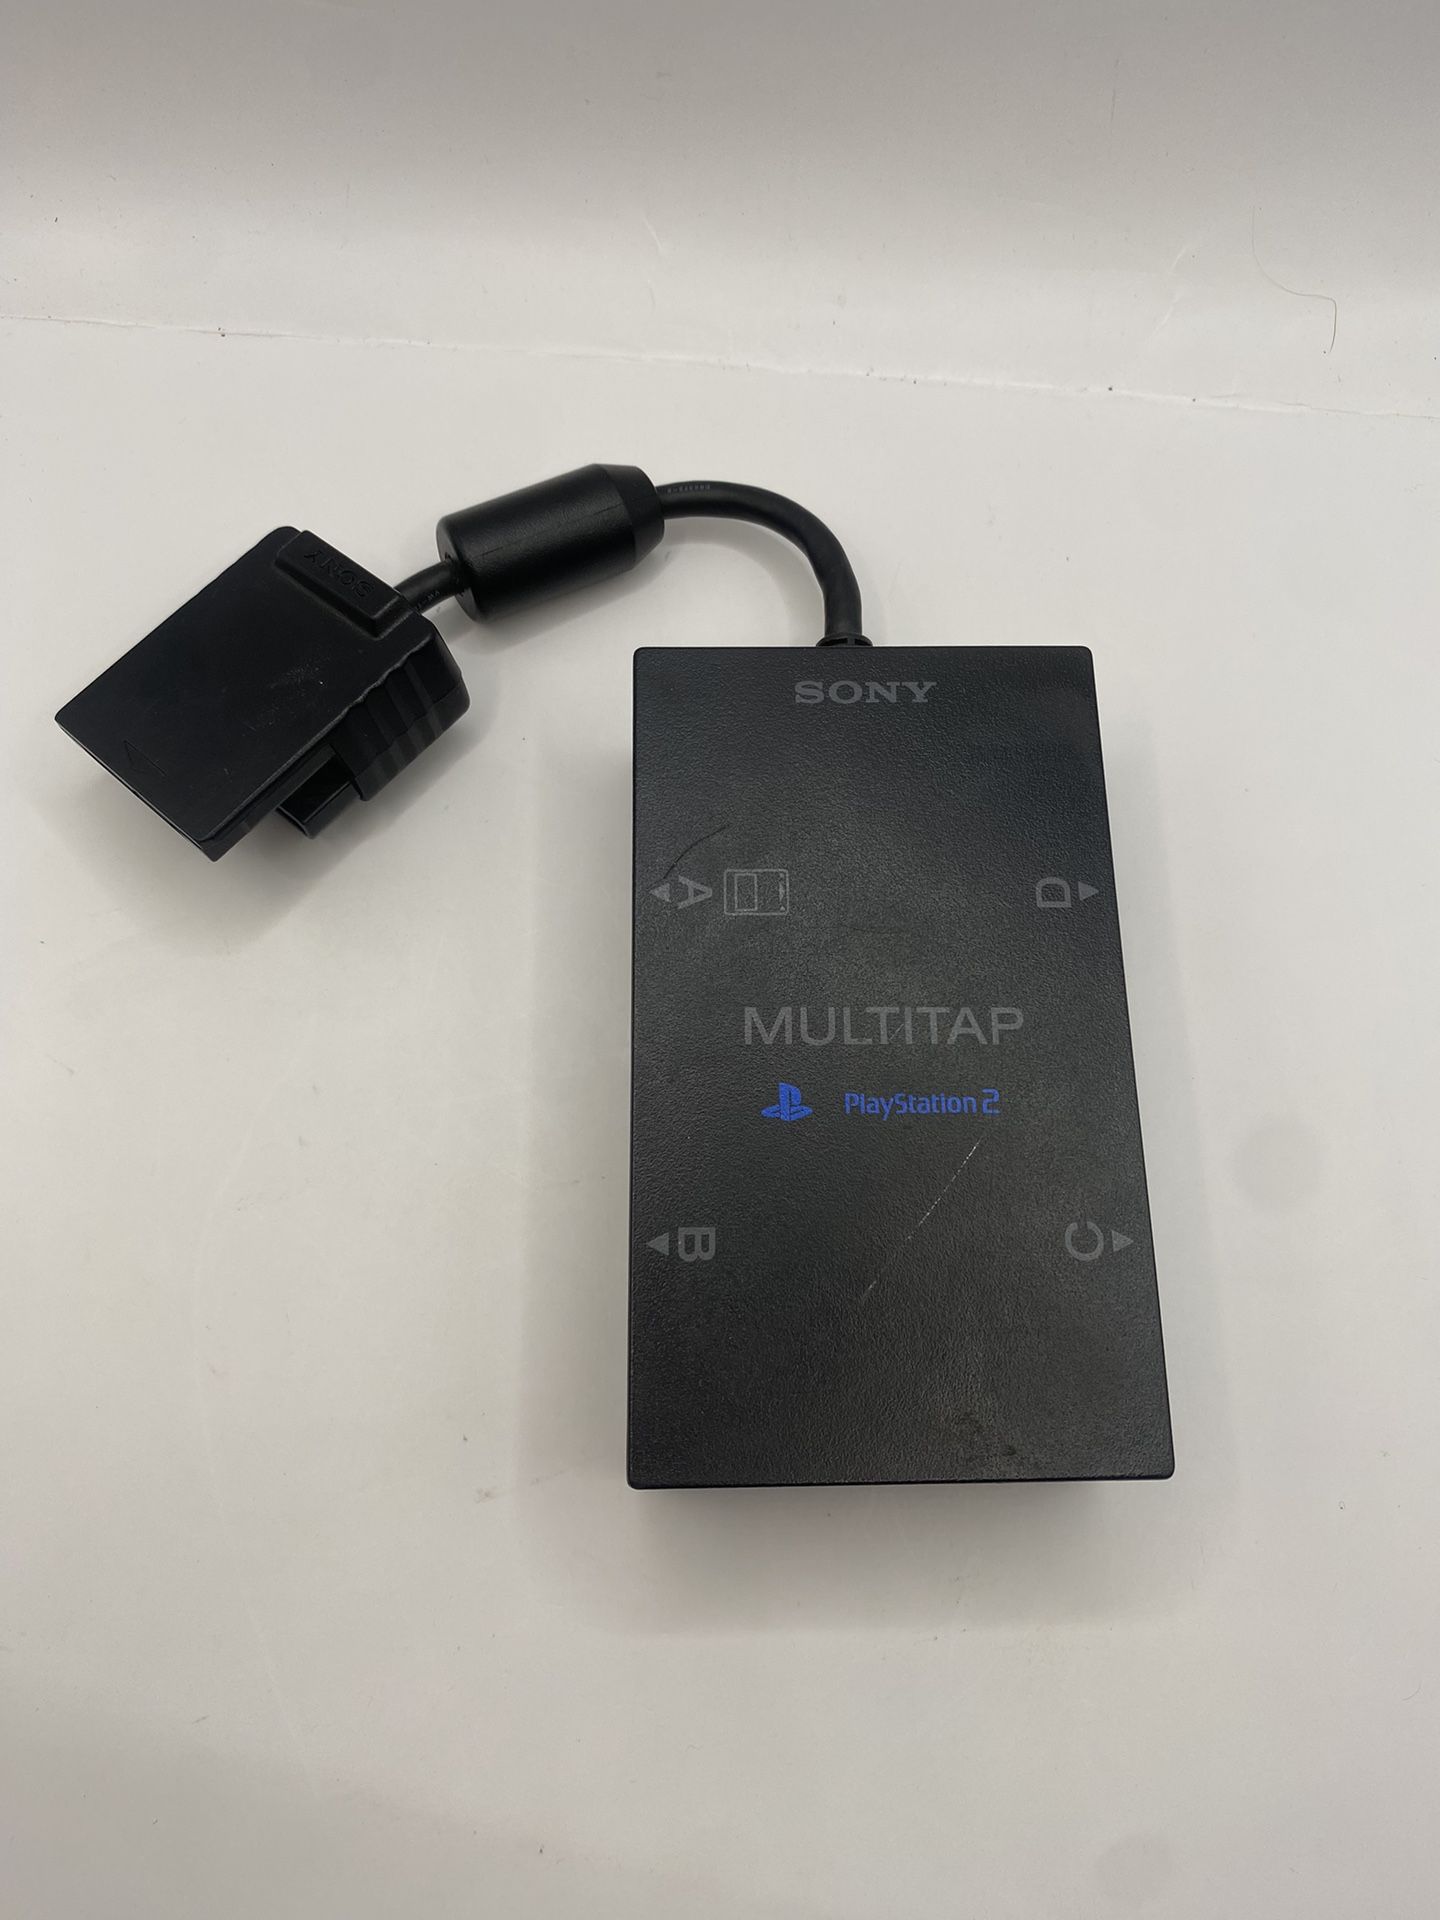 PlayStation 2 Multitap Adapter OEM Sony  Multiplayer Attachment 4 Players Ps2